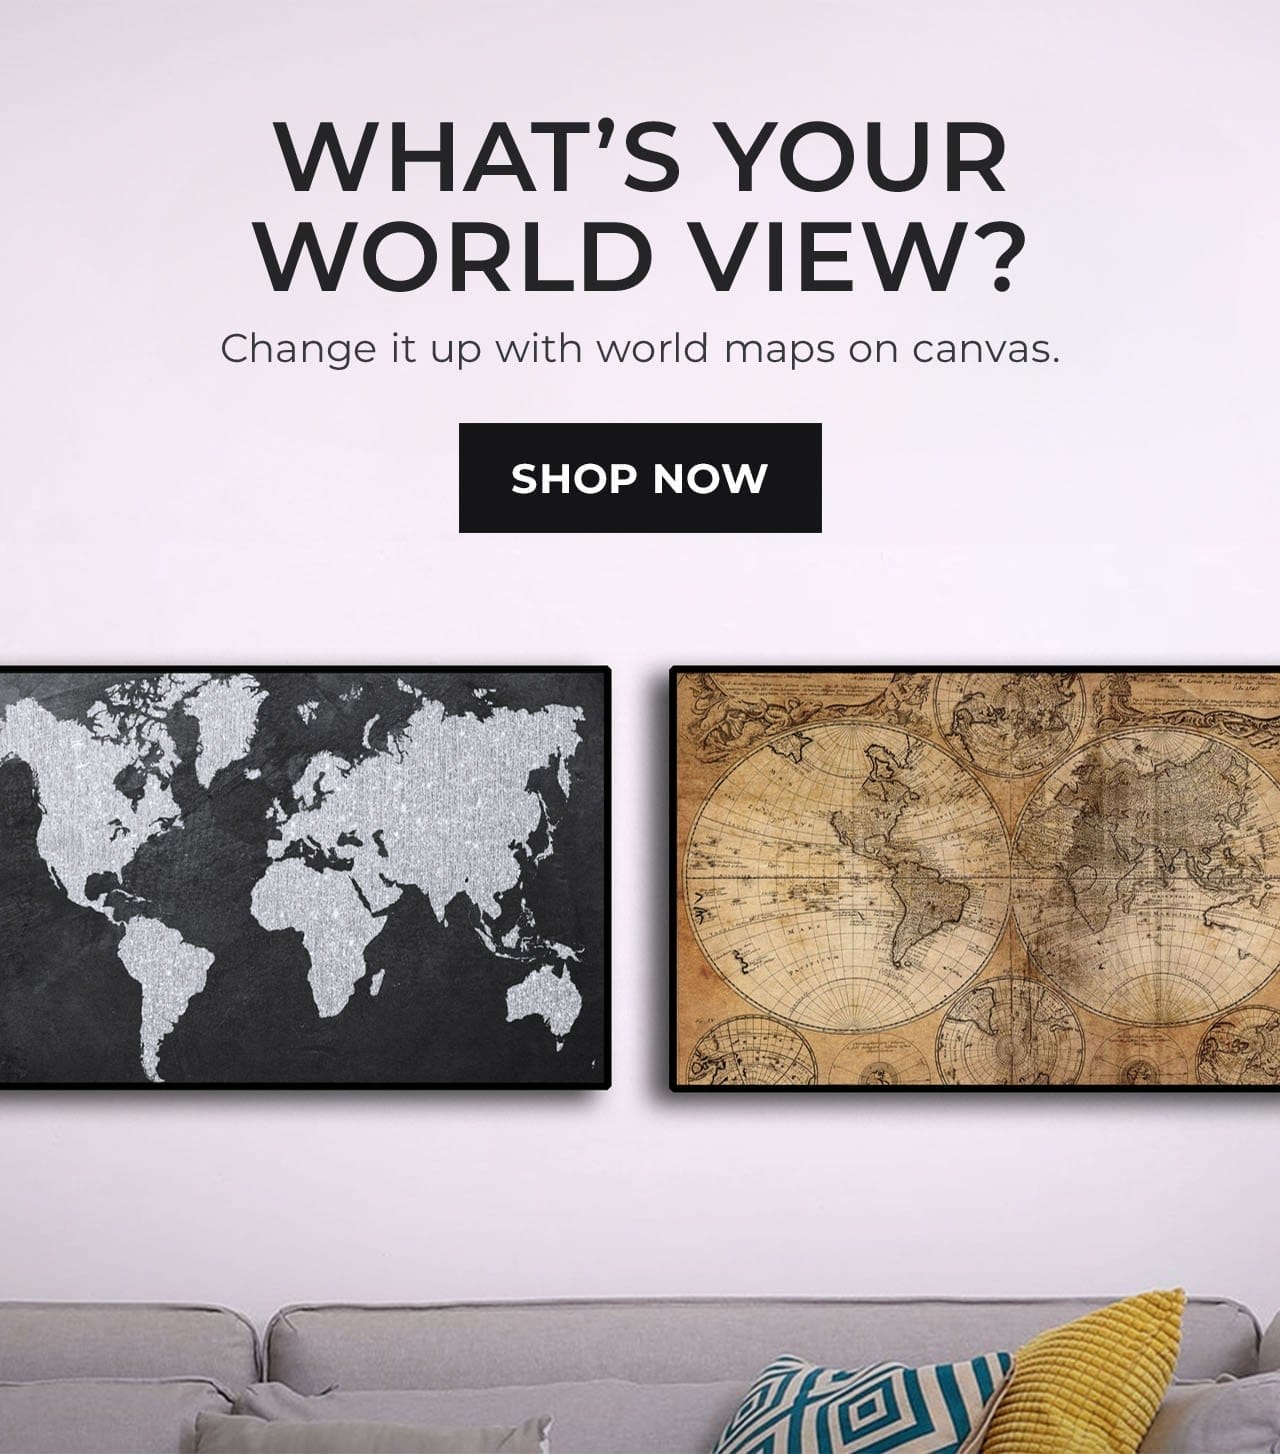 World Maps on Canvas | SHOP NOW